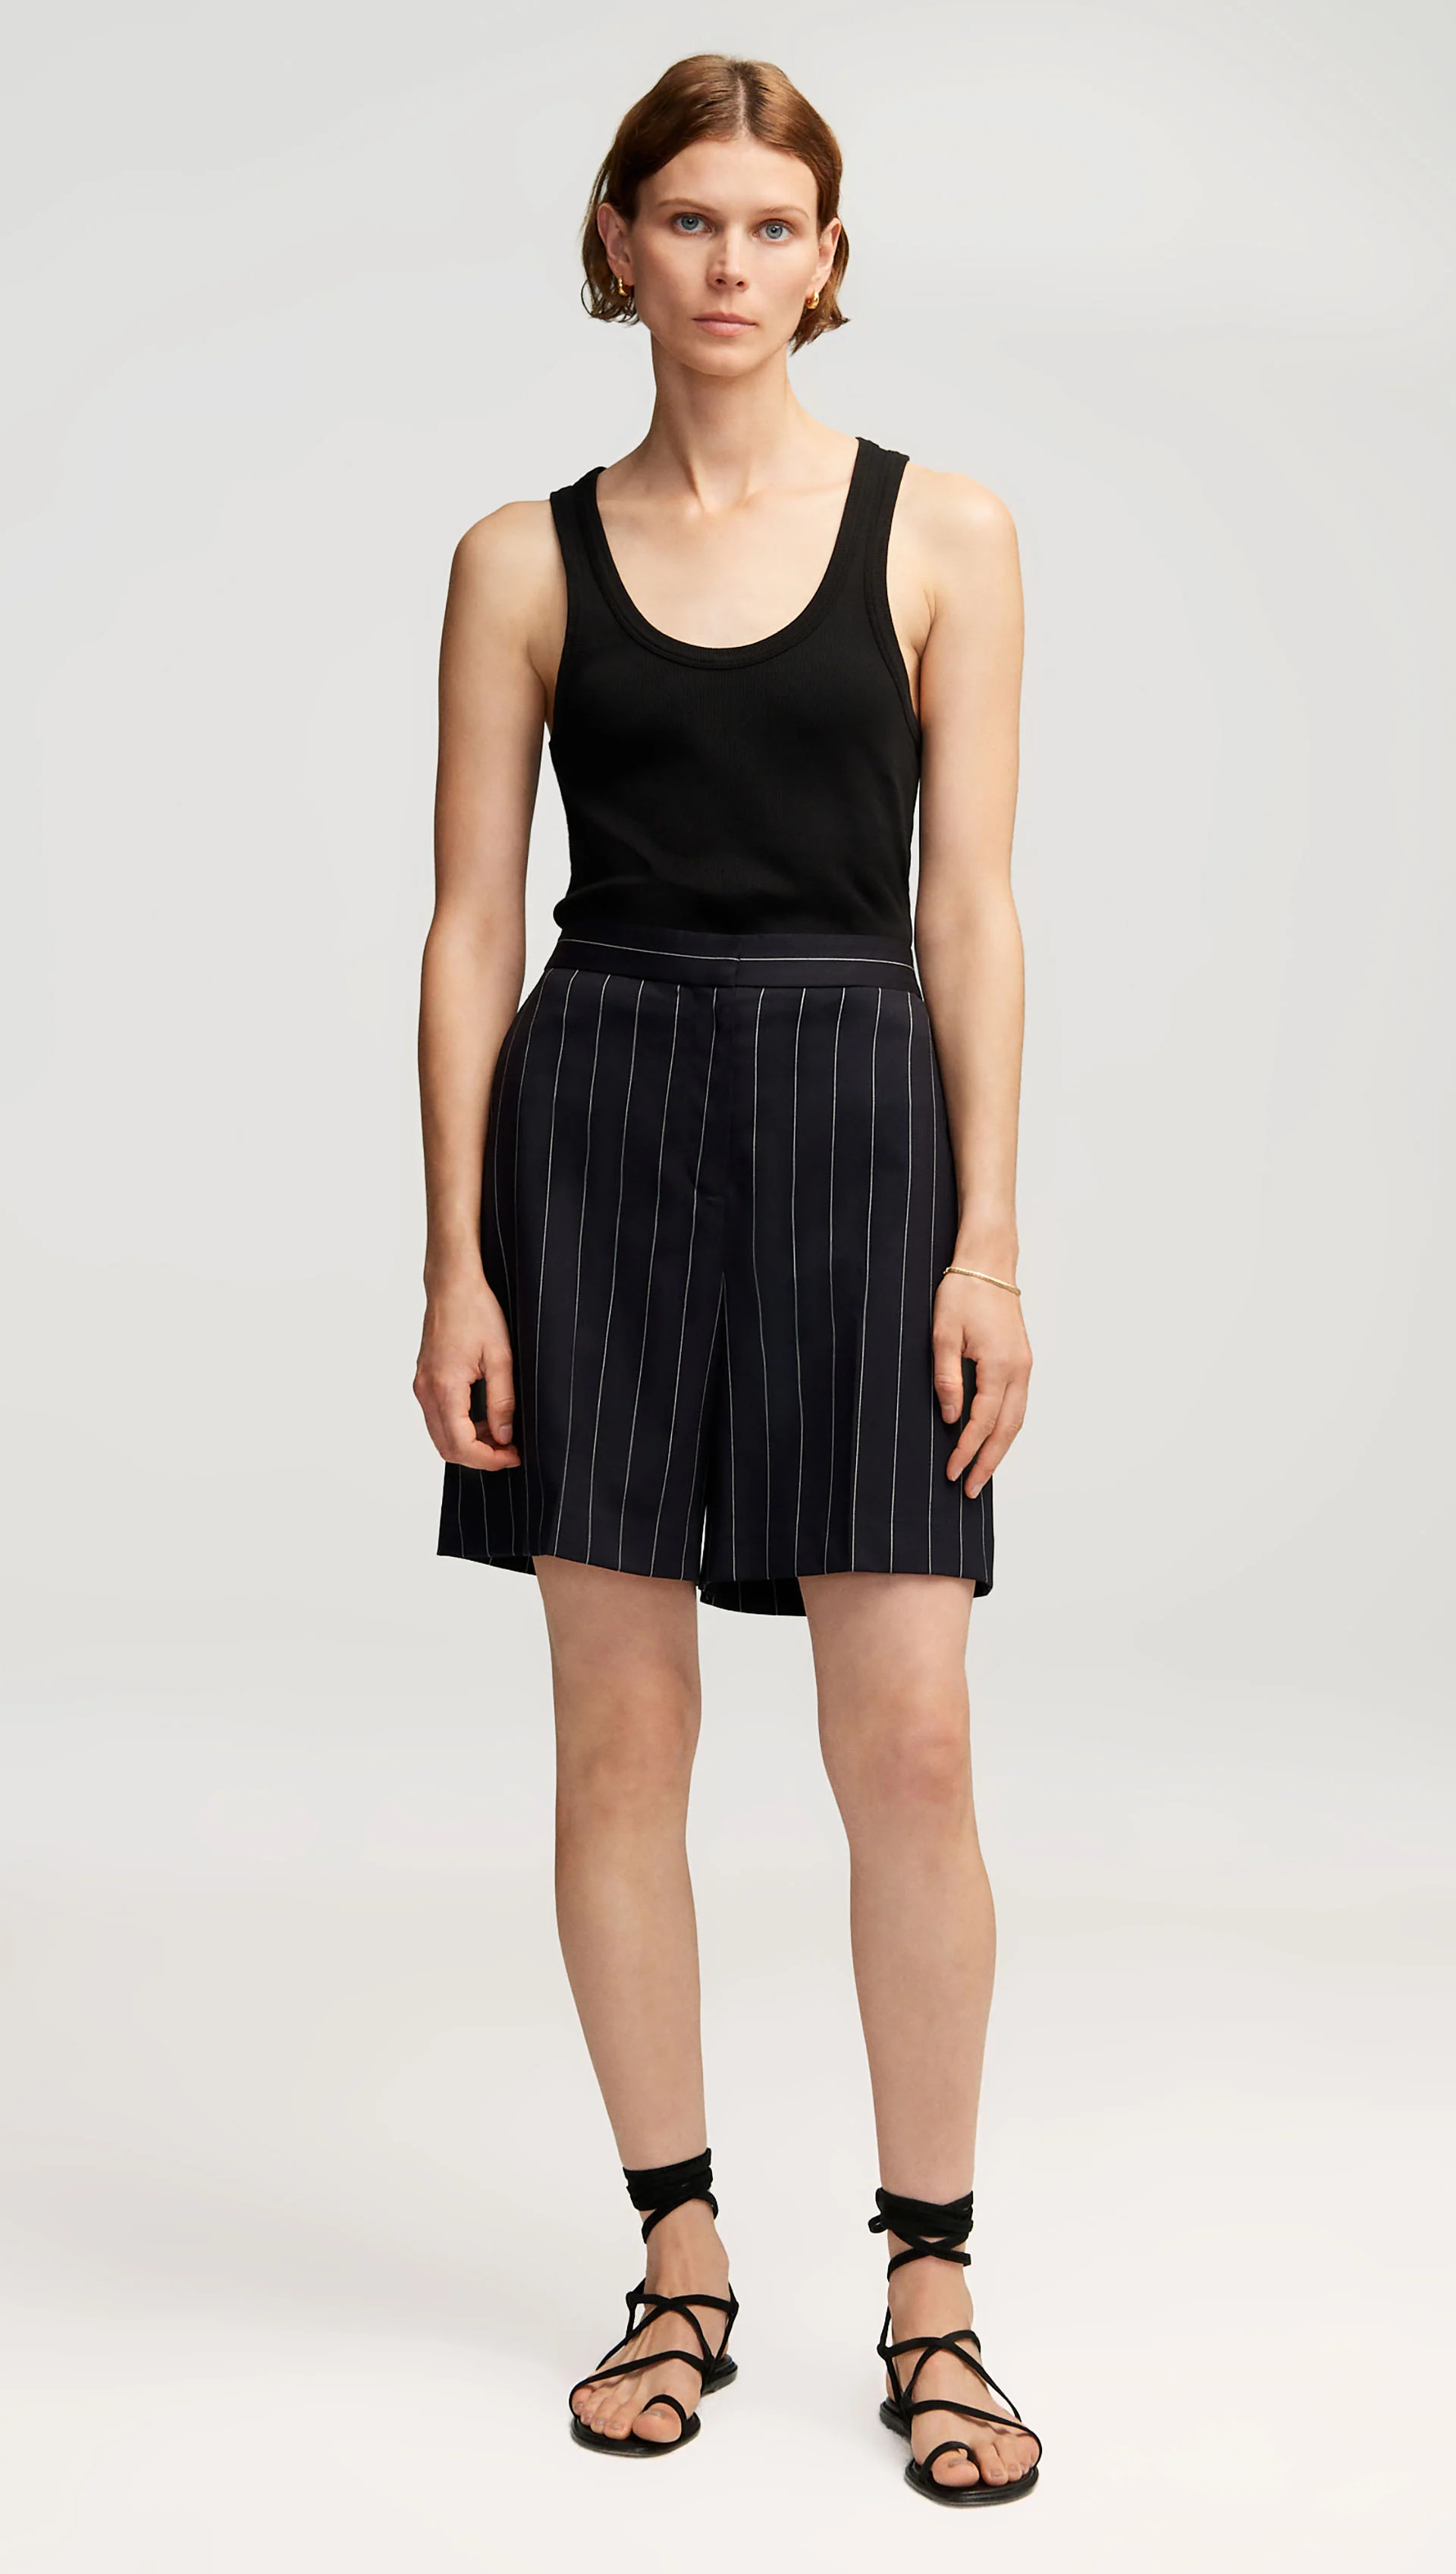 Argent: Tailored Shorts in Stretch Wool | Women's Shorts | Argent | Argent